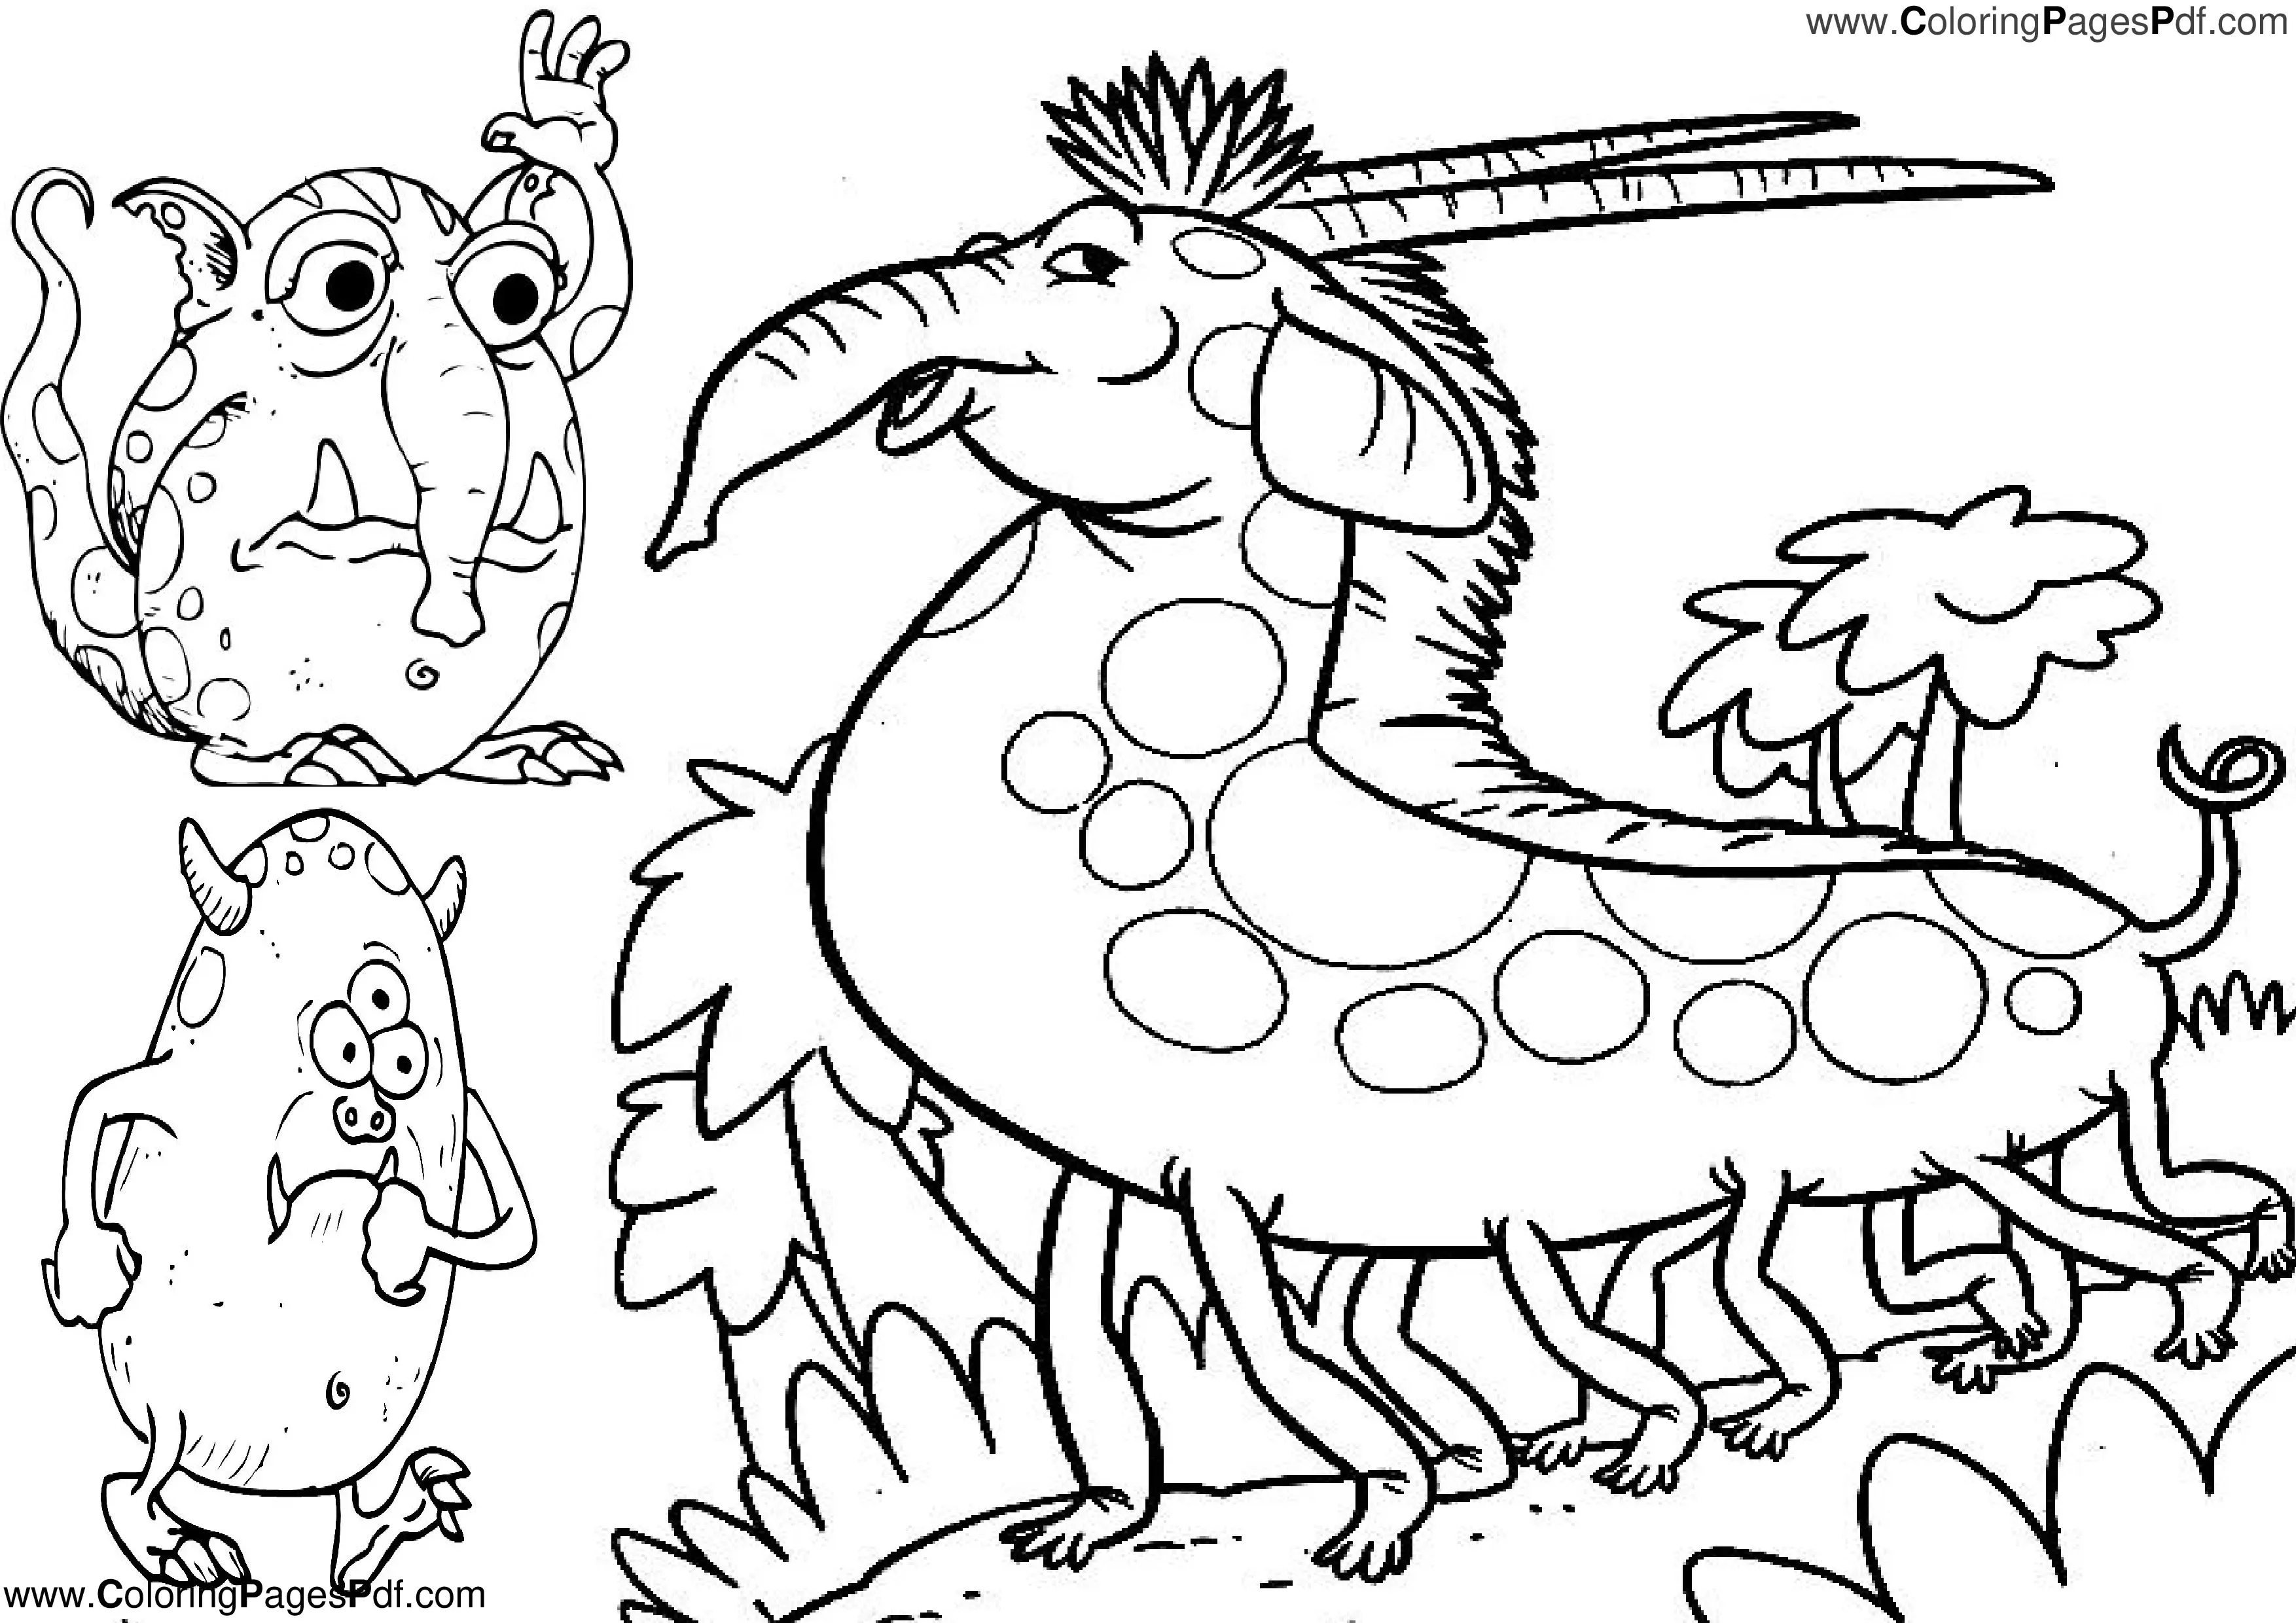 Monster printable coloring pages